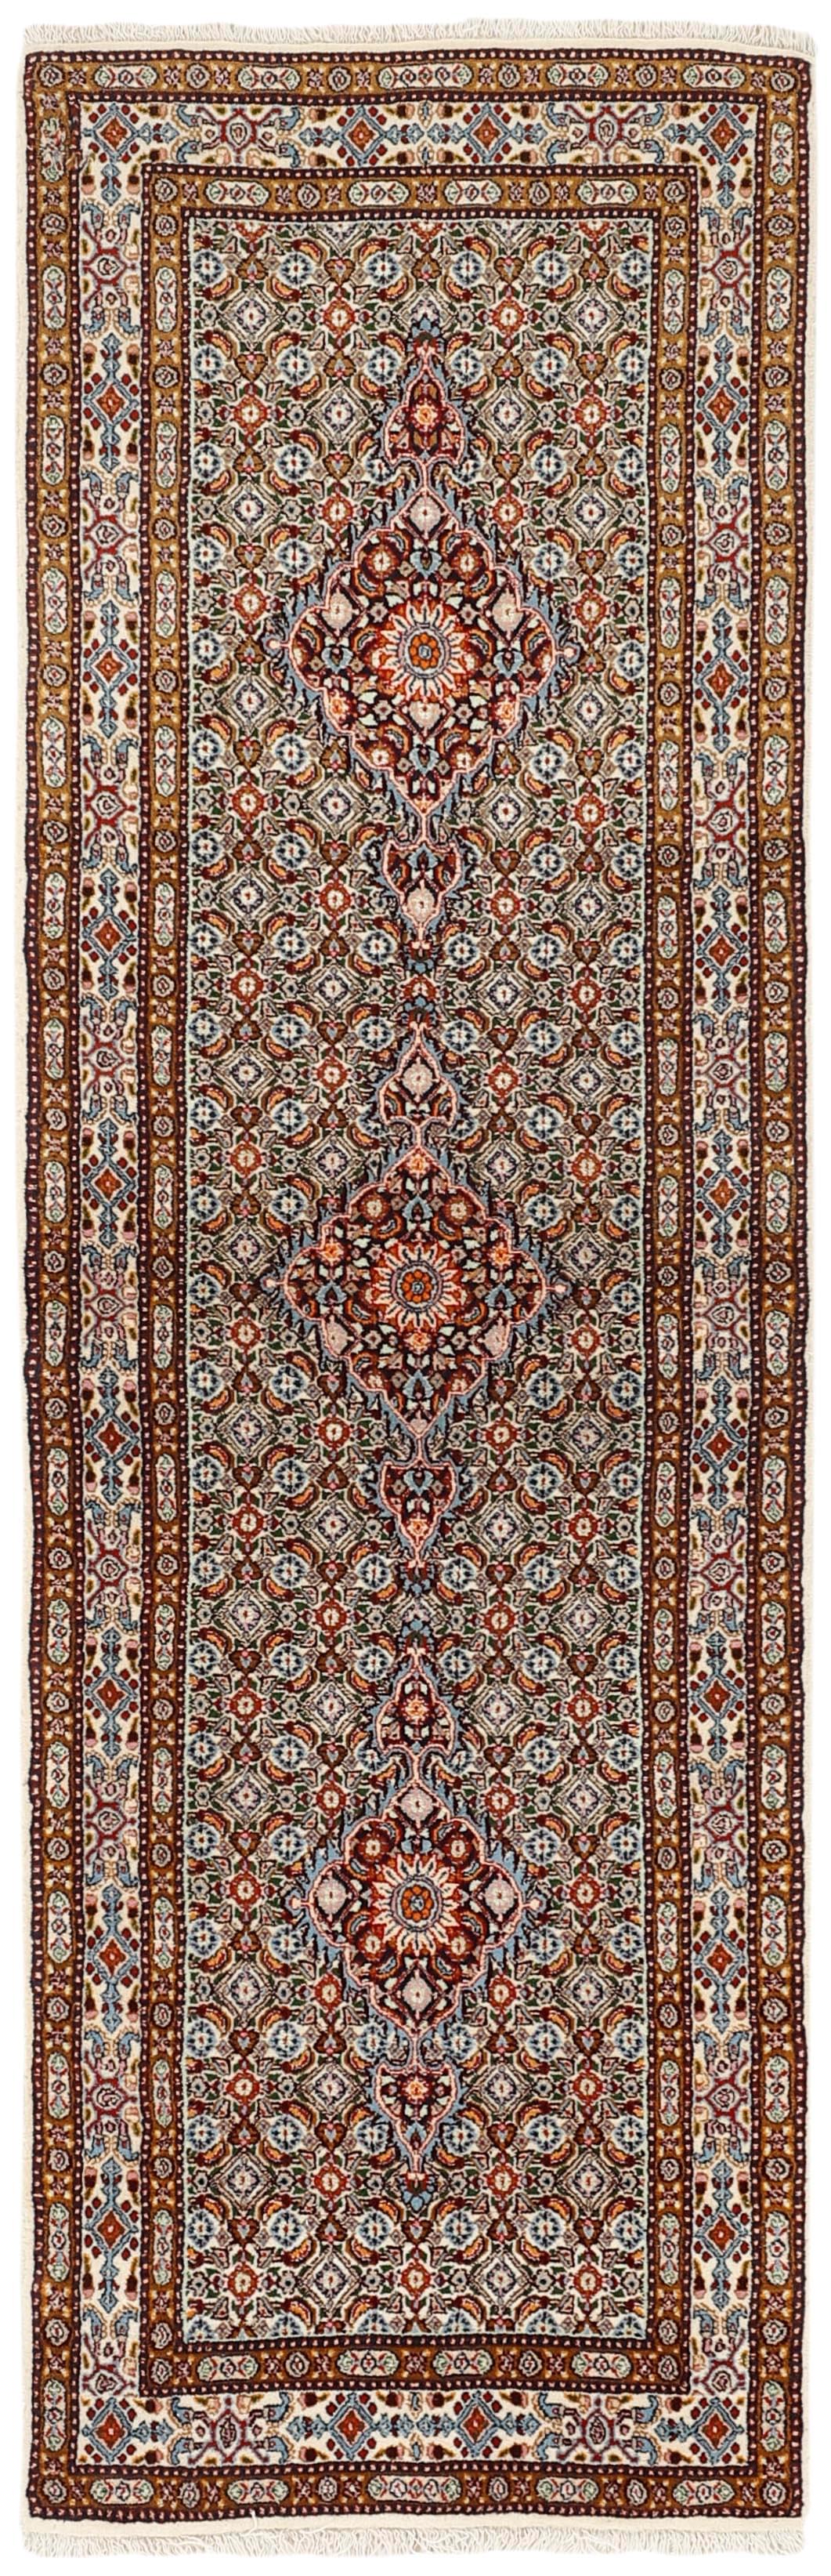 authentic persian runner with traditional floral pattern in red, pink, blue, green, beige, brown and black